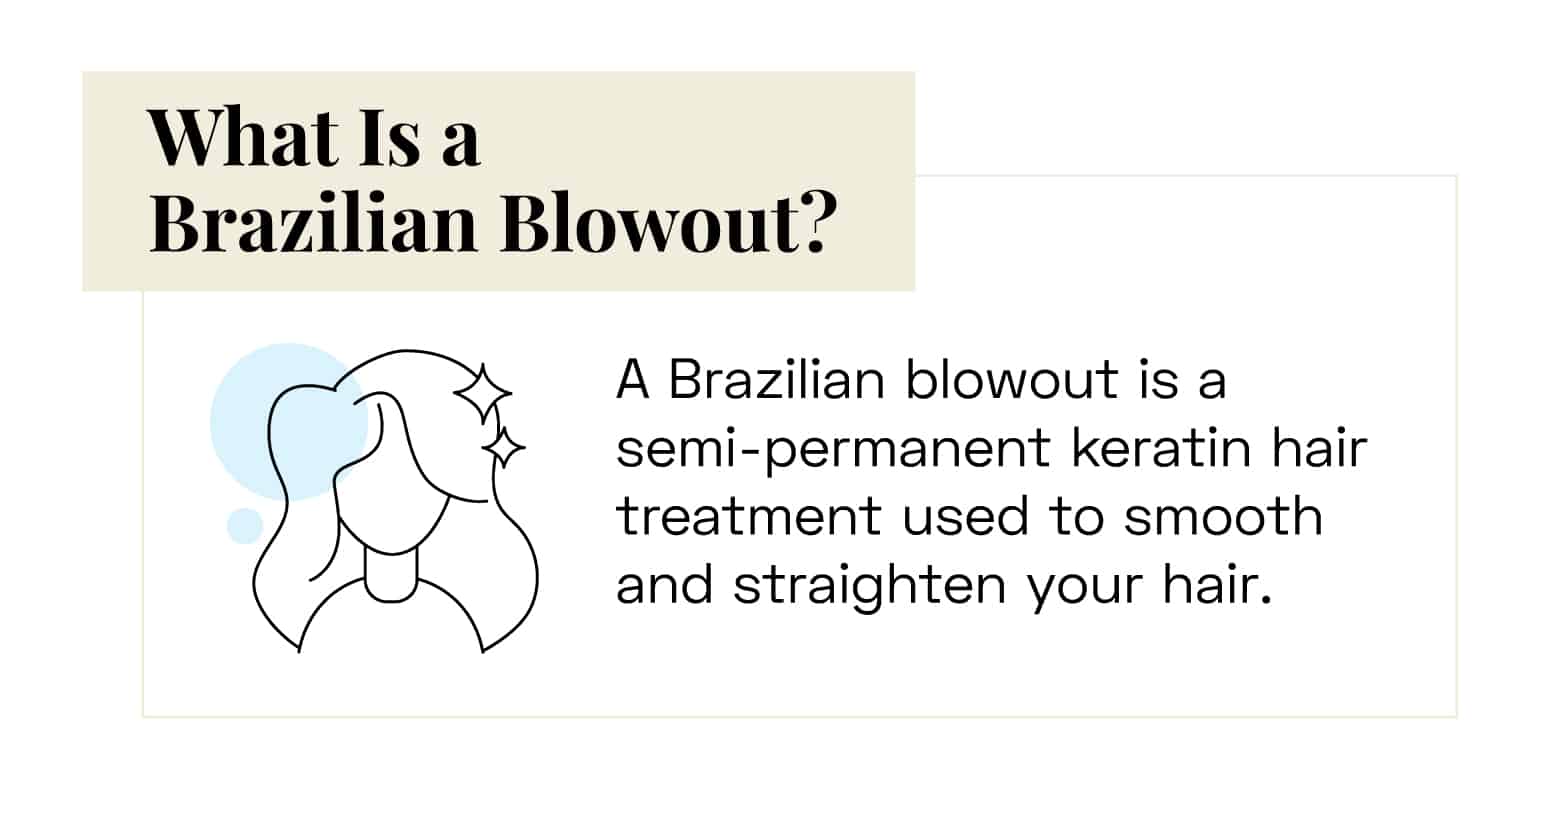 what is a brazilian blowout